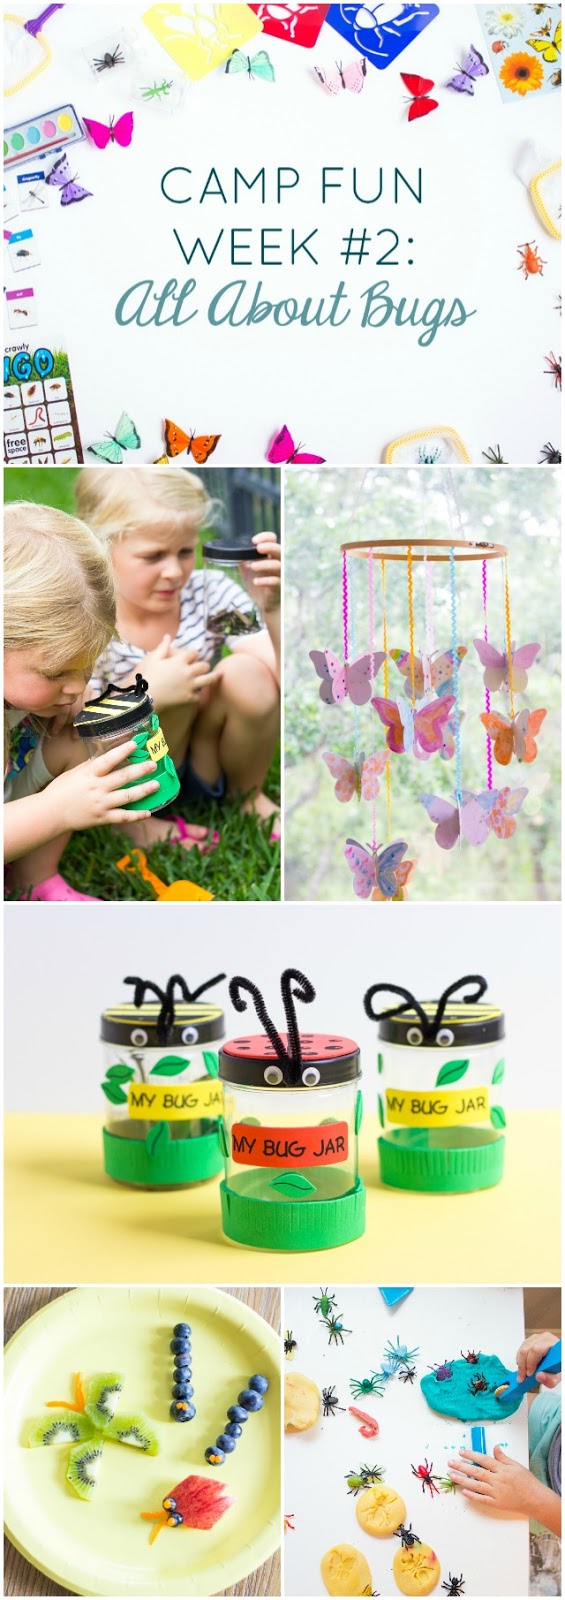 Camp Fun "All About Bugs" - check out all these creepy crawly bug activities for kids summer camp at home!